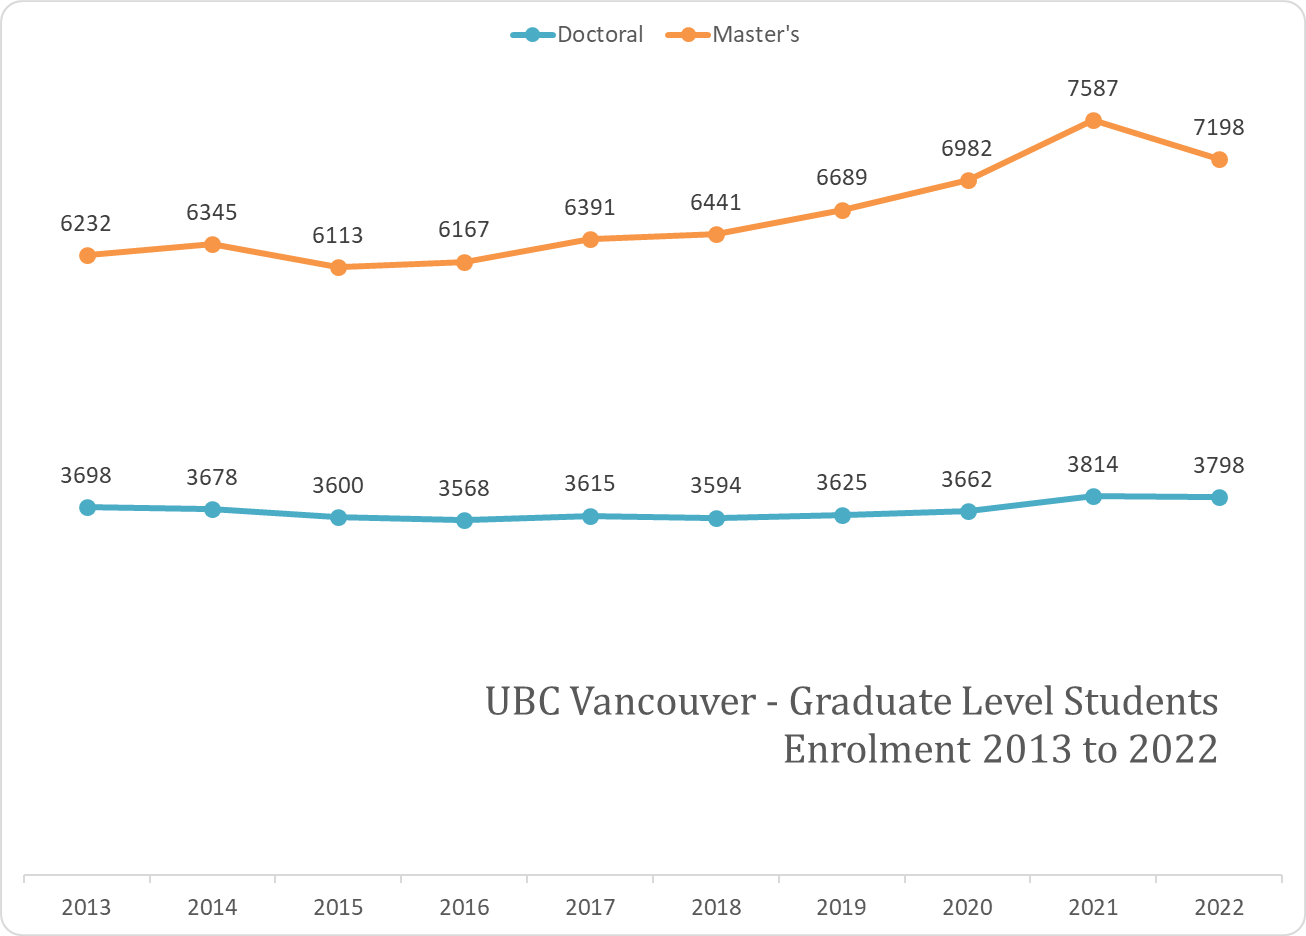 Graph showing the enrolment of graduate level students between 2013 and 2022